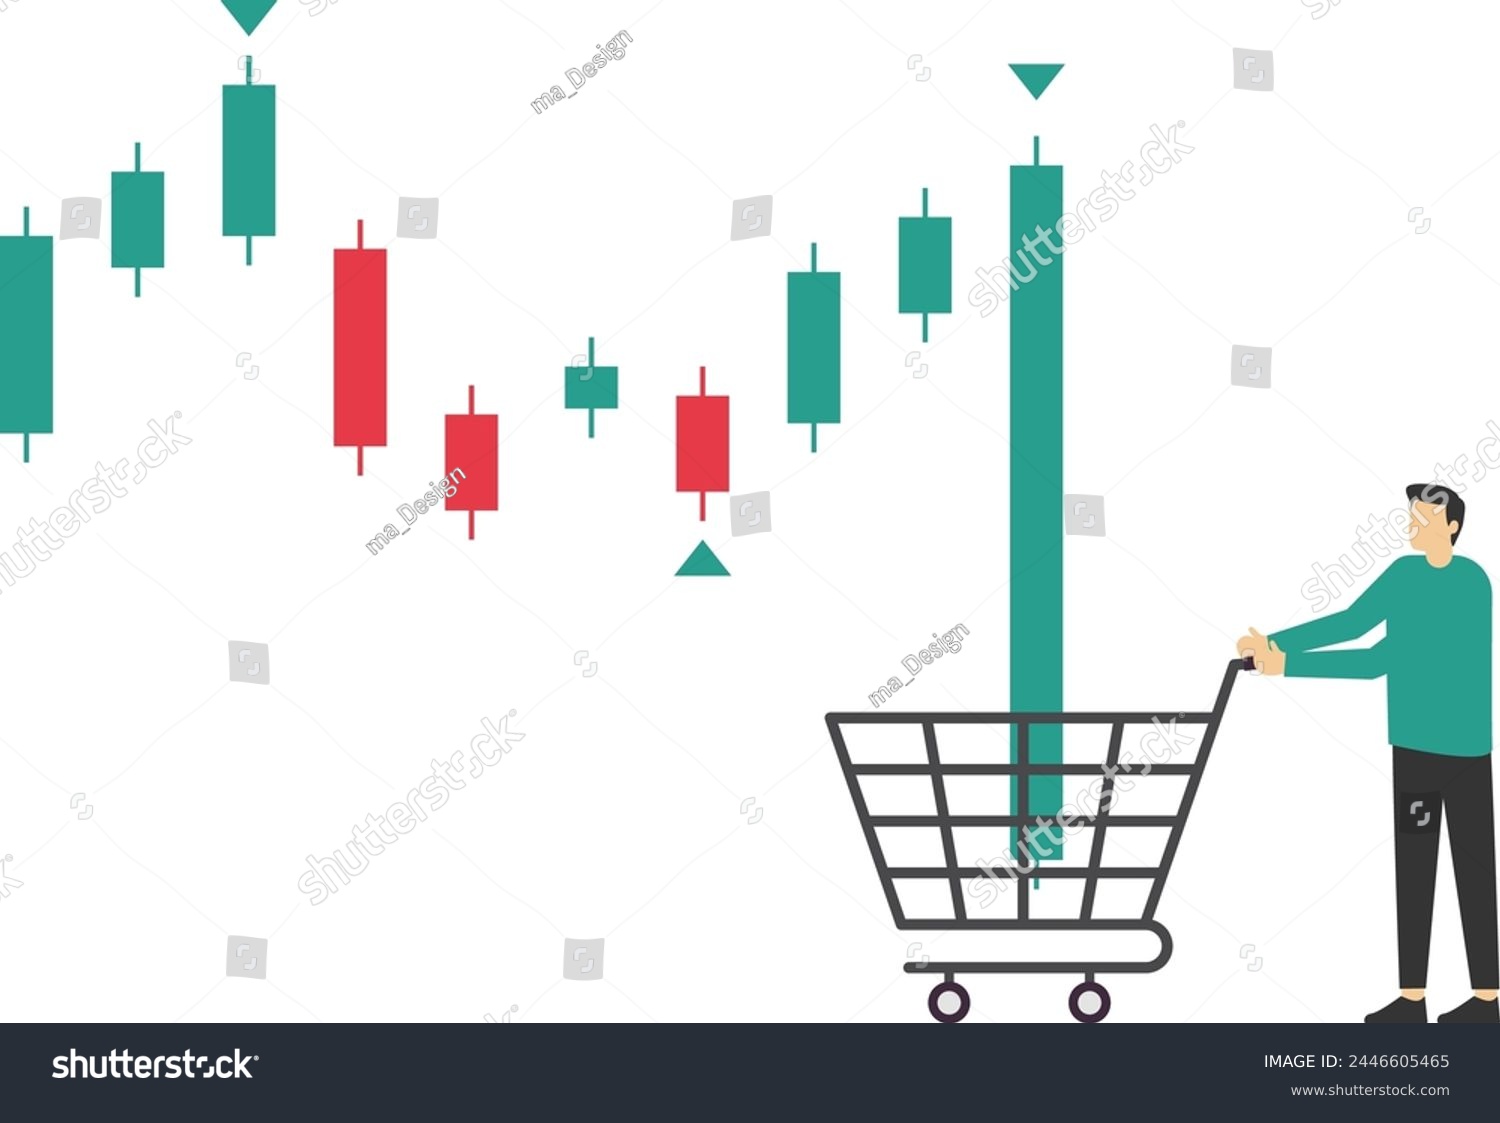 SVG of Buy on the dip, purchase stock when price drop, trader signal to invest, make profit from market collapse concept, smart businessman investor buy stock with down candlestick in shopping cart.

 svg